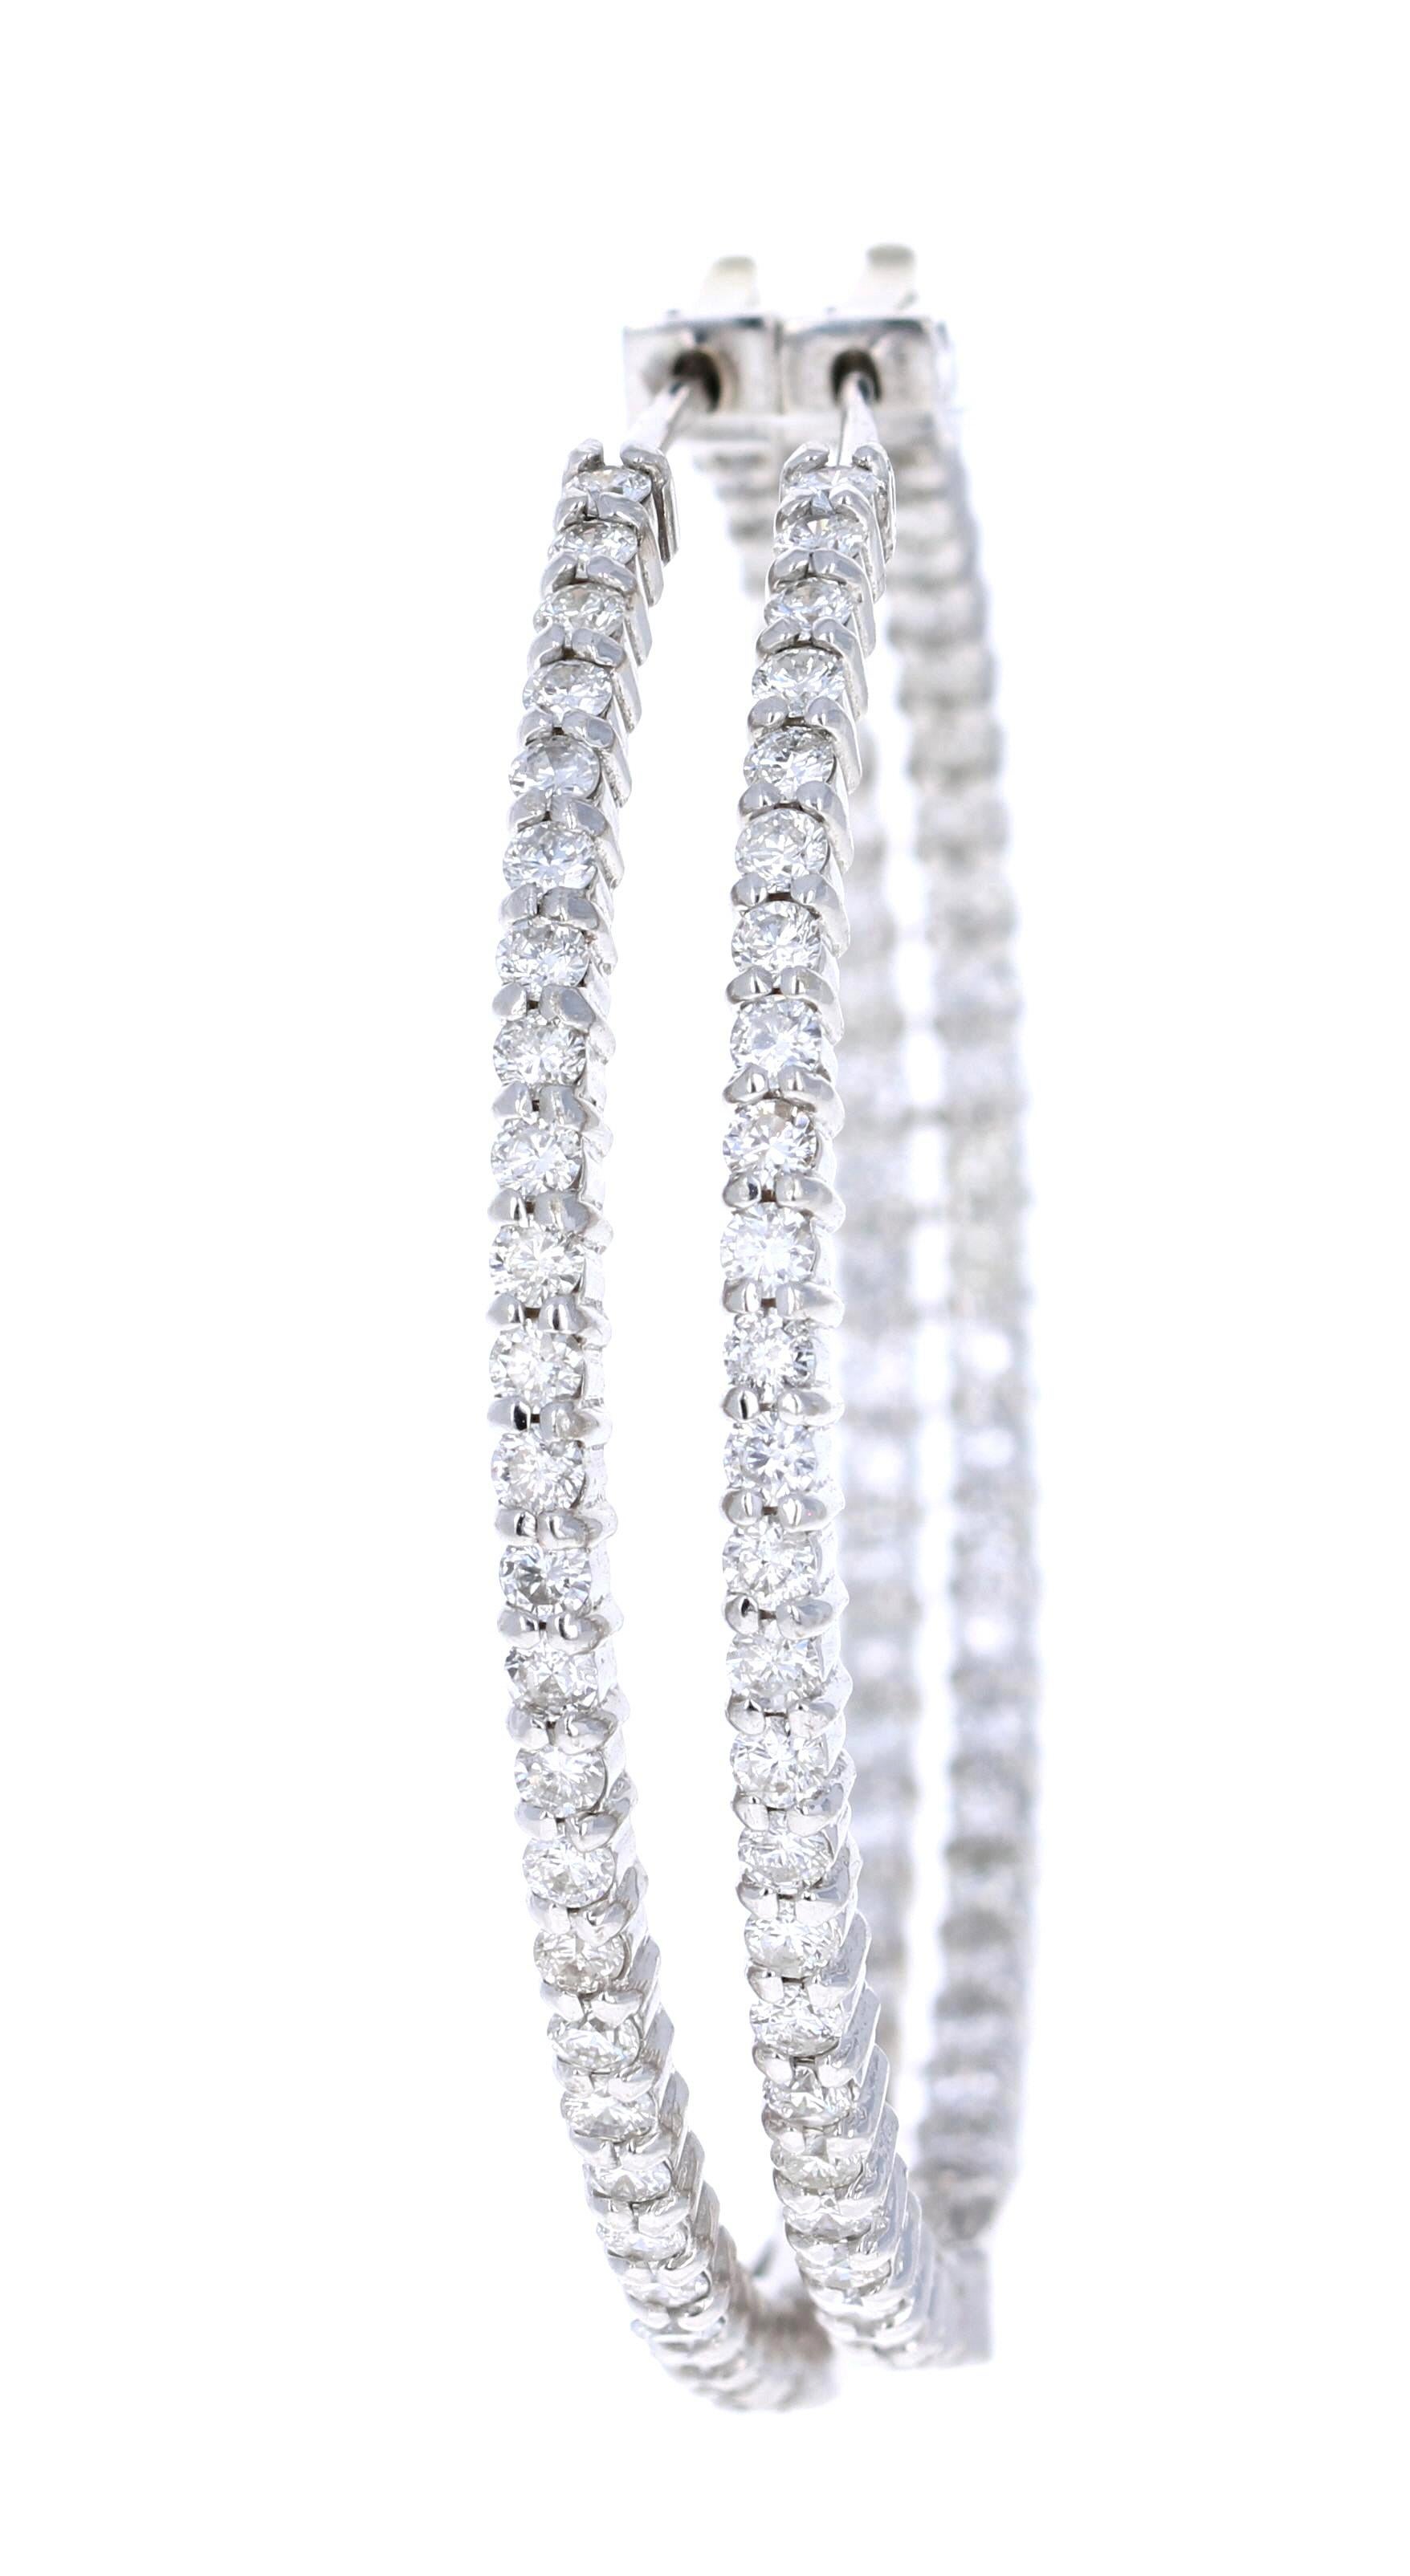 These beautiful and simple hoop earrings are 102 Round Cut Diamonds that weigh 2.52 Carats. 

The hoops are set in 14 Karat White Gold and weigh approximately 13.3 grams. 

